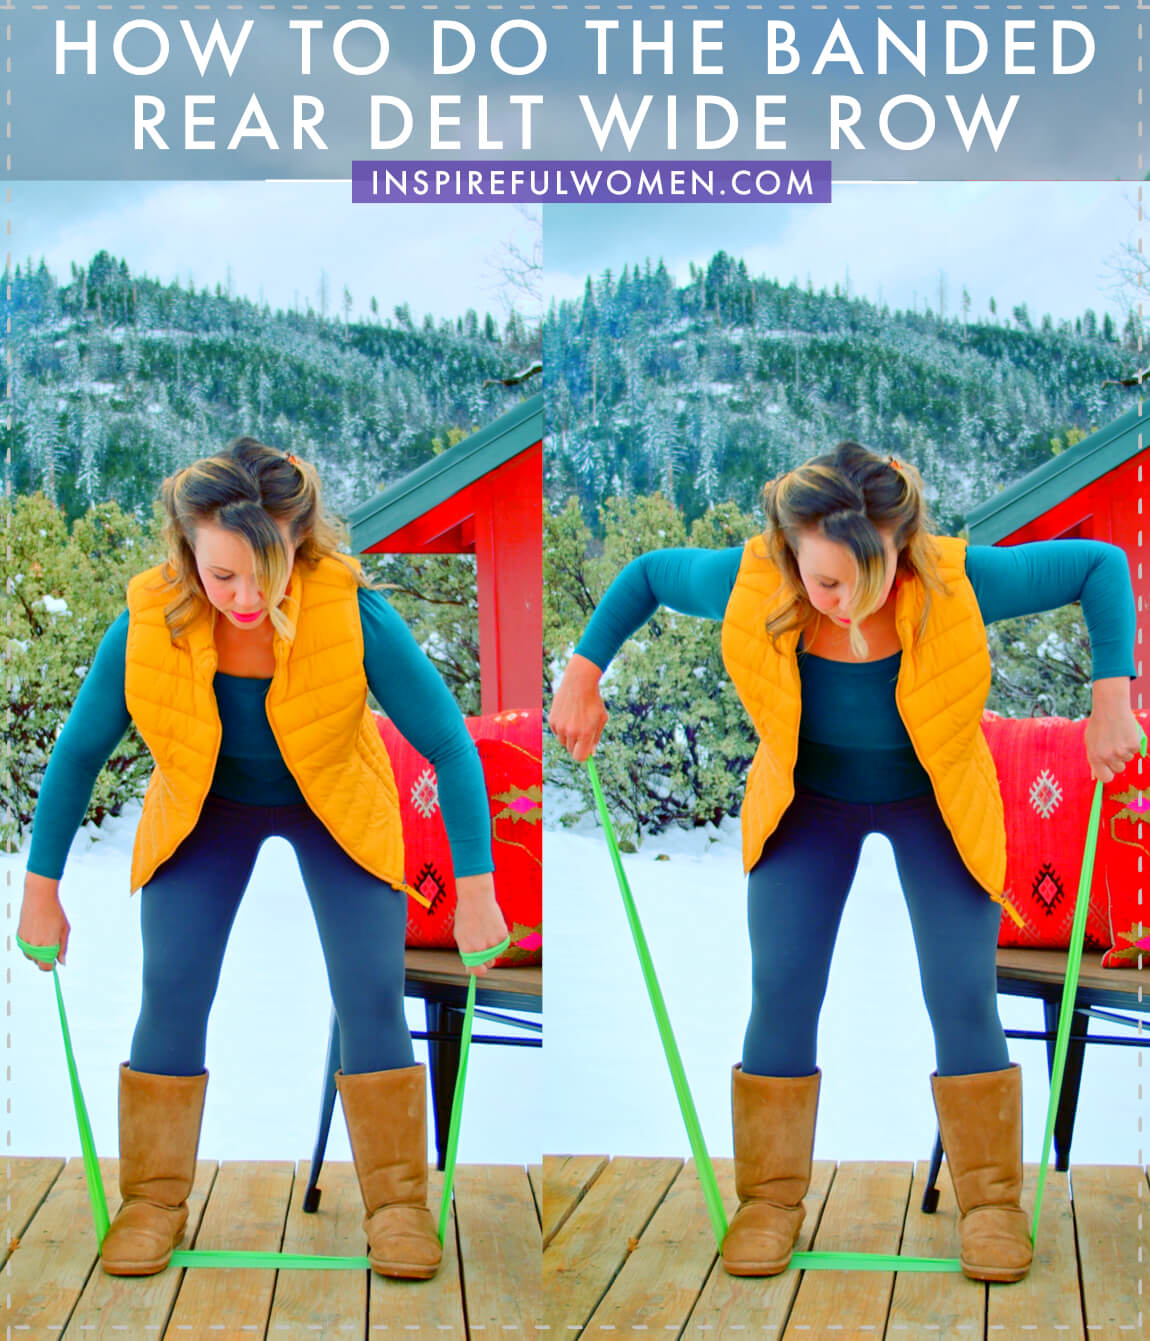 how-to-do-bent-over-banded-rear-delt-row-shoulder-workout-at-home-for-women-40-plus